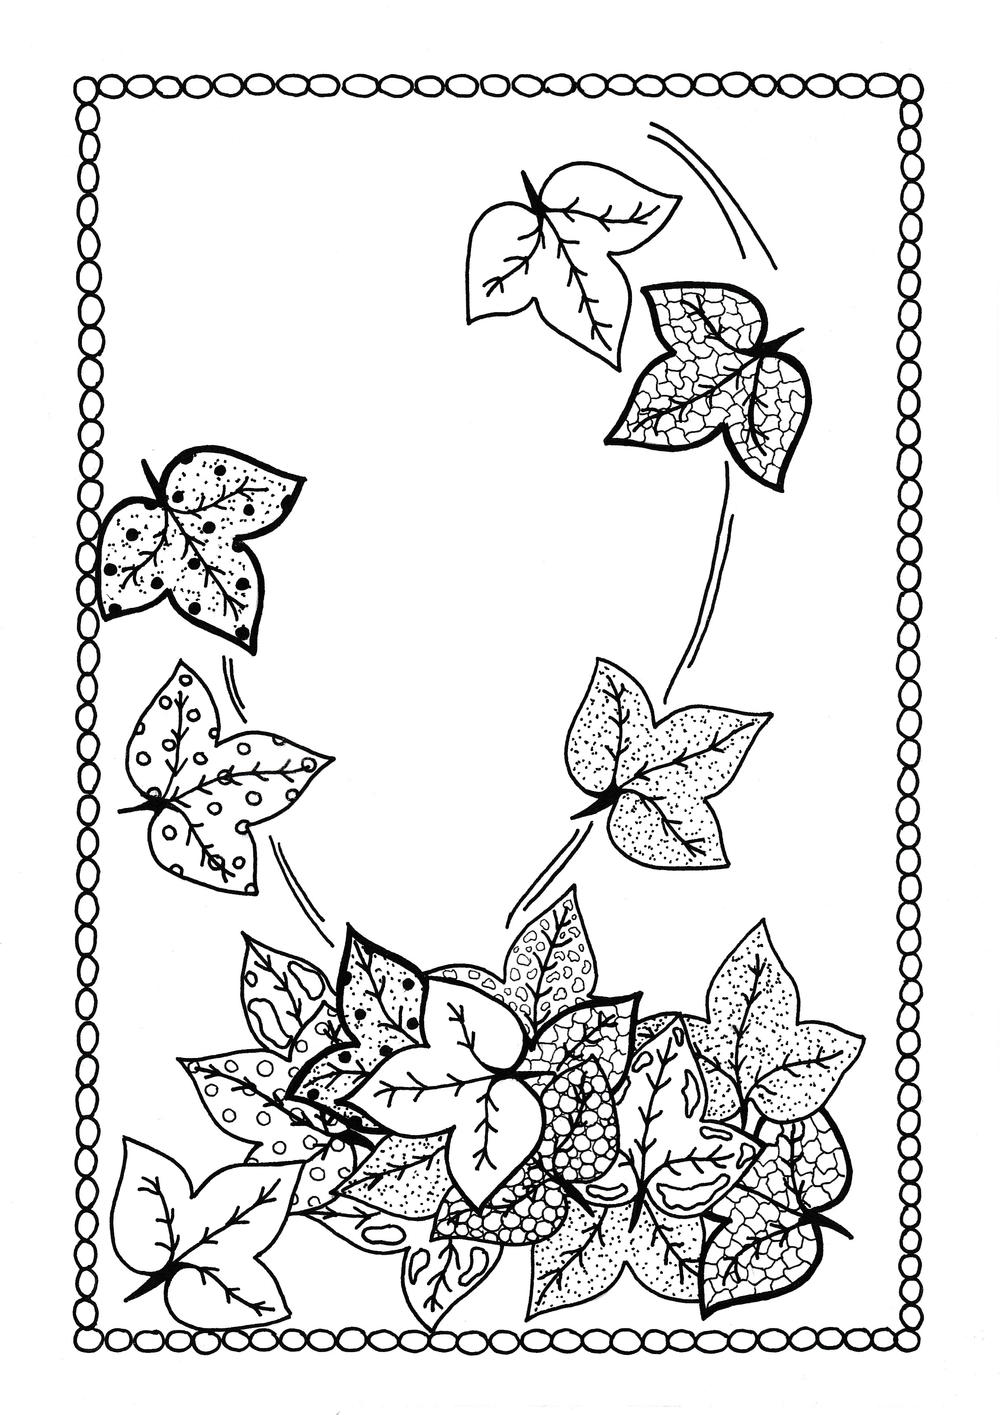 Windswept Autumn Leaves Fall Coloring Sheet | AllFreeHolidayCrafts.com